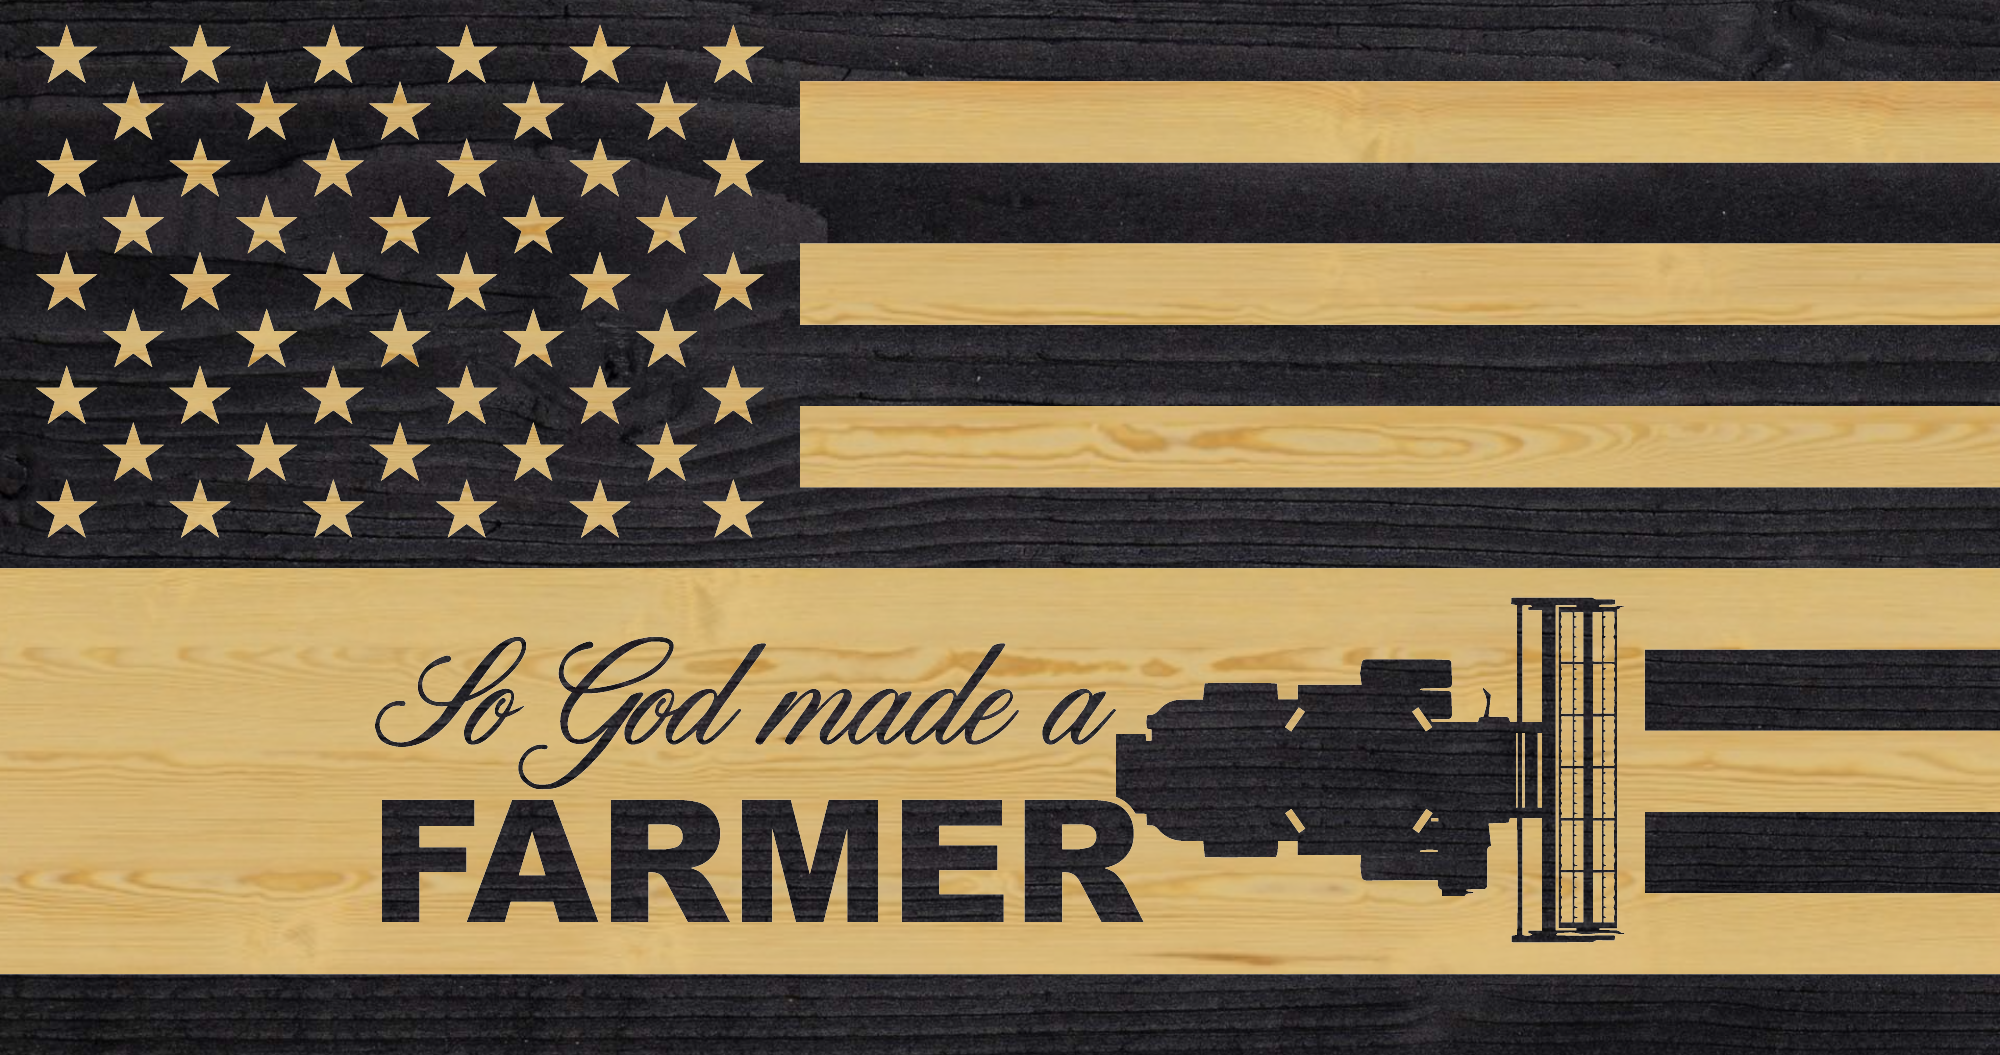 Made in God USA